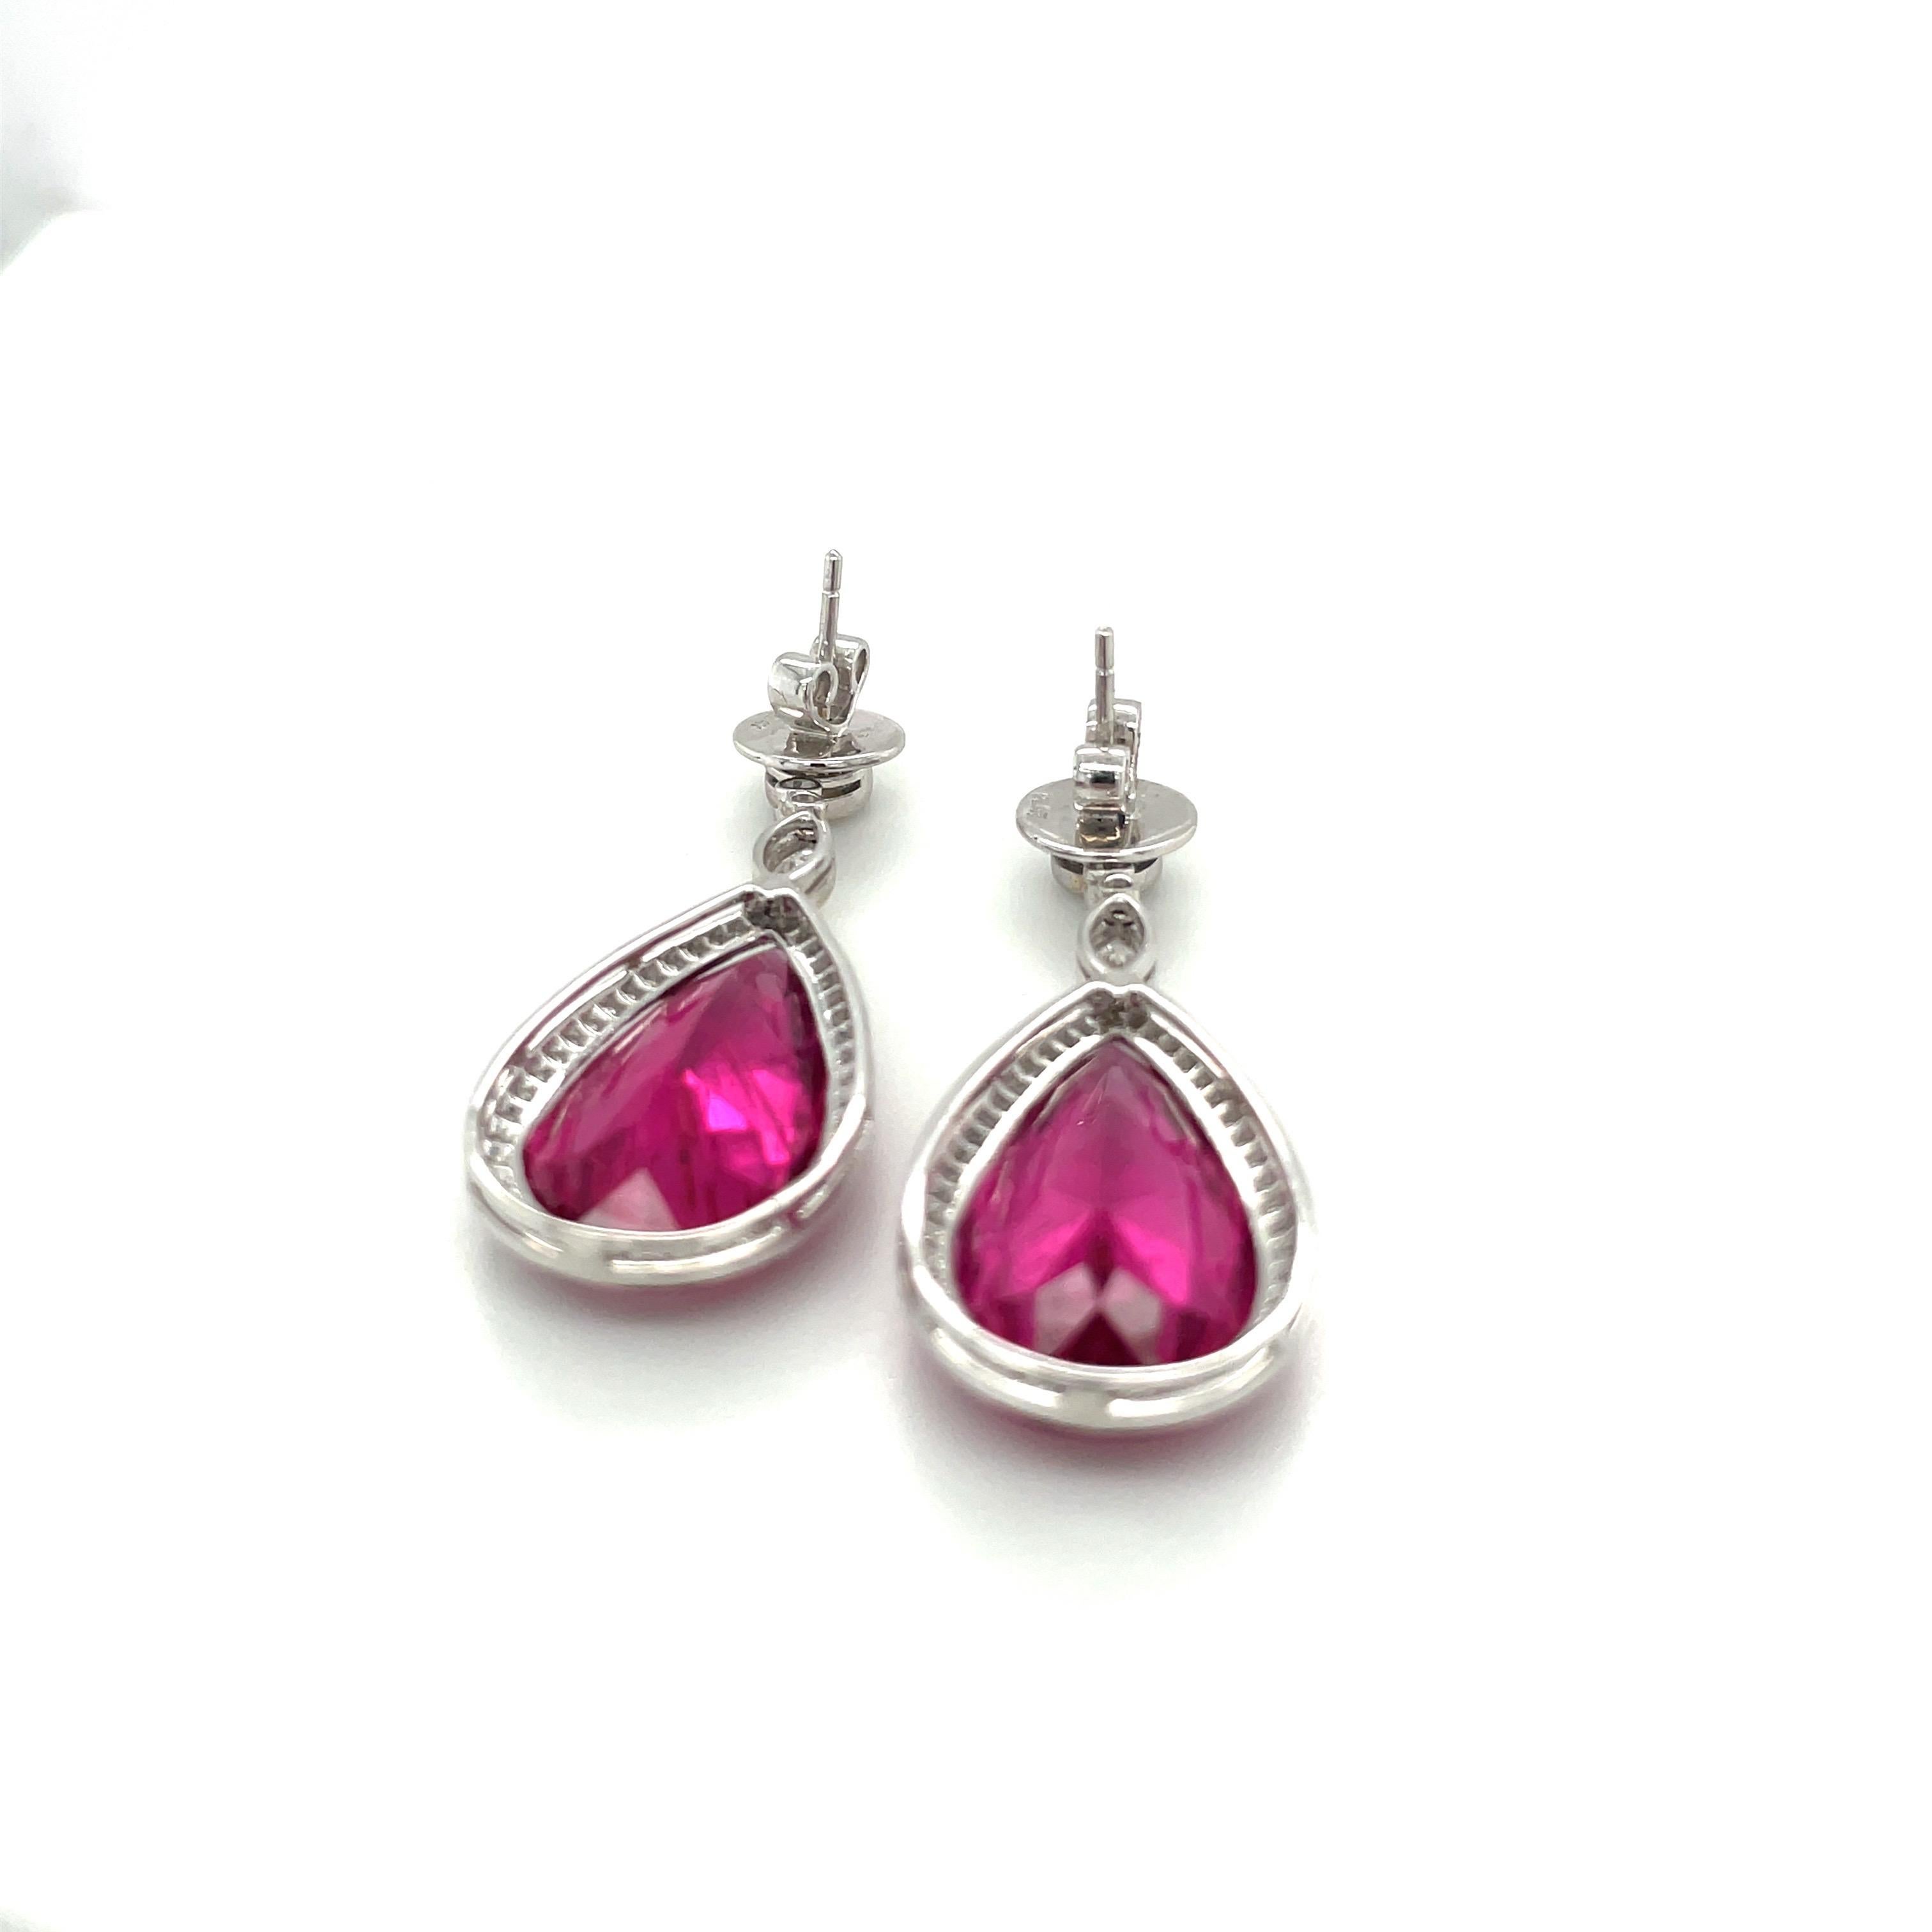 These stunning pear shaped rubelite earrings are beautifully set in a flat wire micro-pavé diamond  setting.Round brilliant and marquis diamonds accent the top of these platinum post earrings. The earrings measure 1-7/8